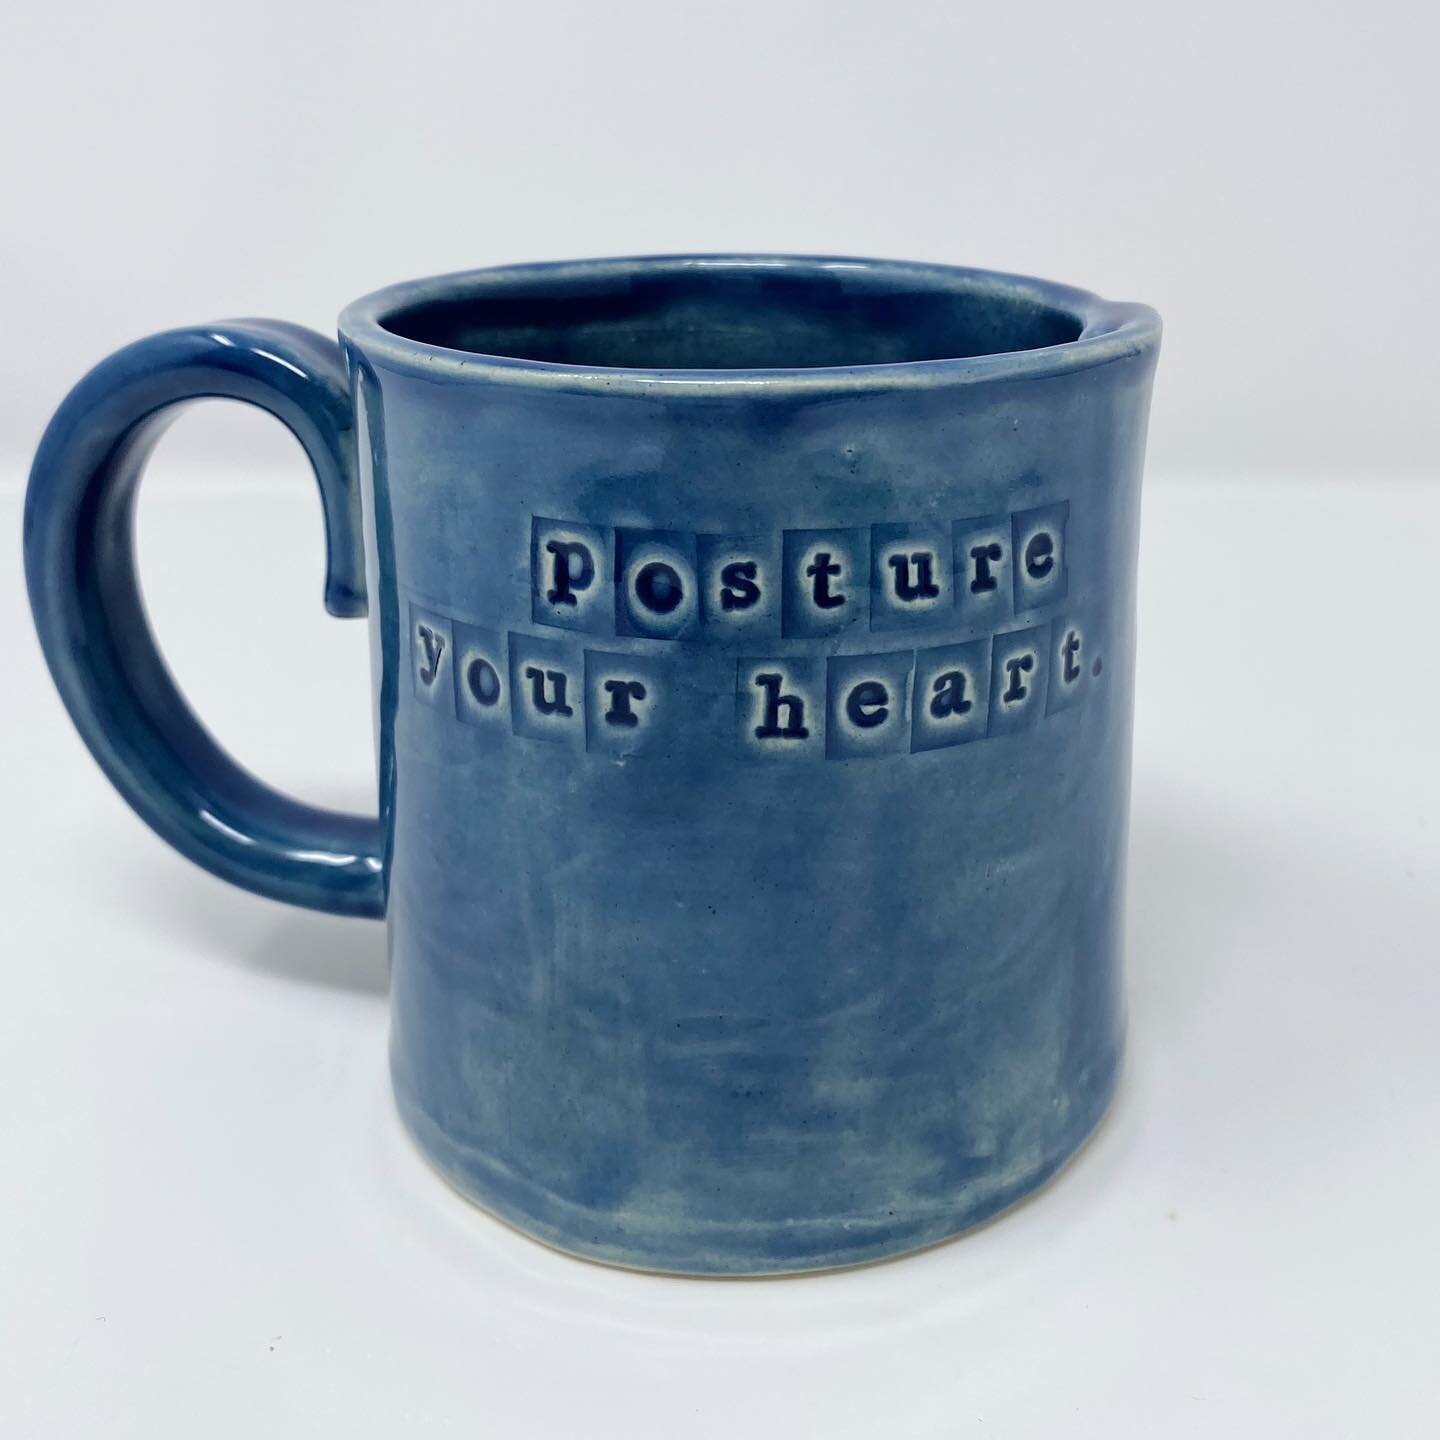 Hand built clay mug with hand stamped words &ldquo;Posture your heart.&rdquo;

Microwave, dishwasher, and food safe

Made with love

#tiffanystephensart #getyourhandsdirty #enlighten #postureyourheart #withlove #imperfect #impermanent #wabisabi #hand